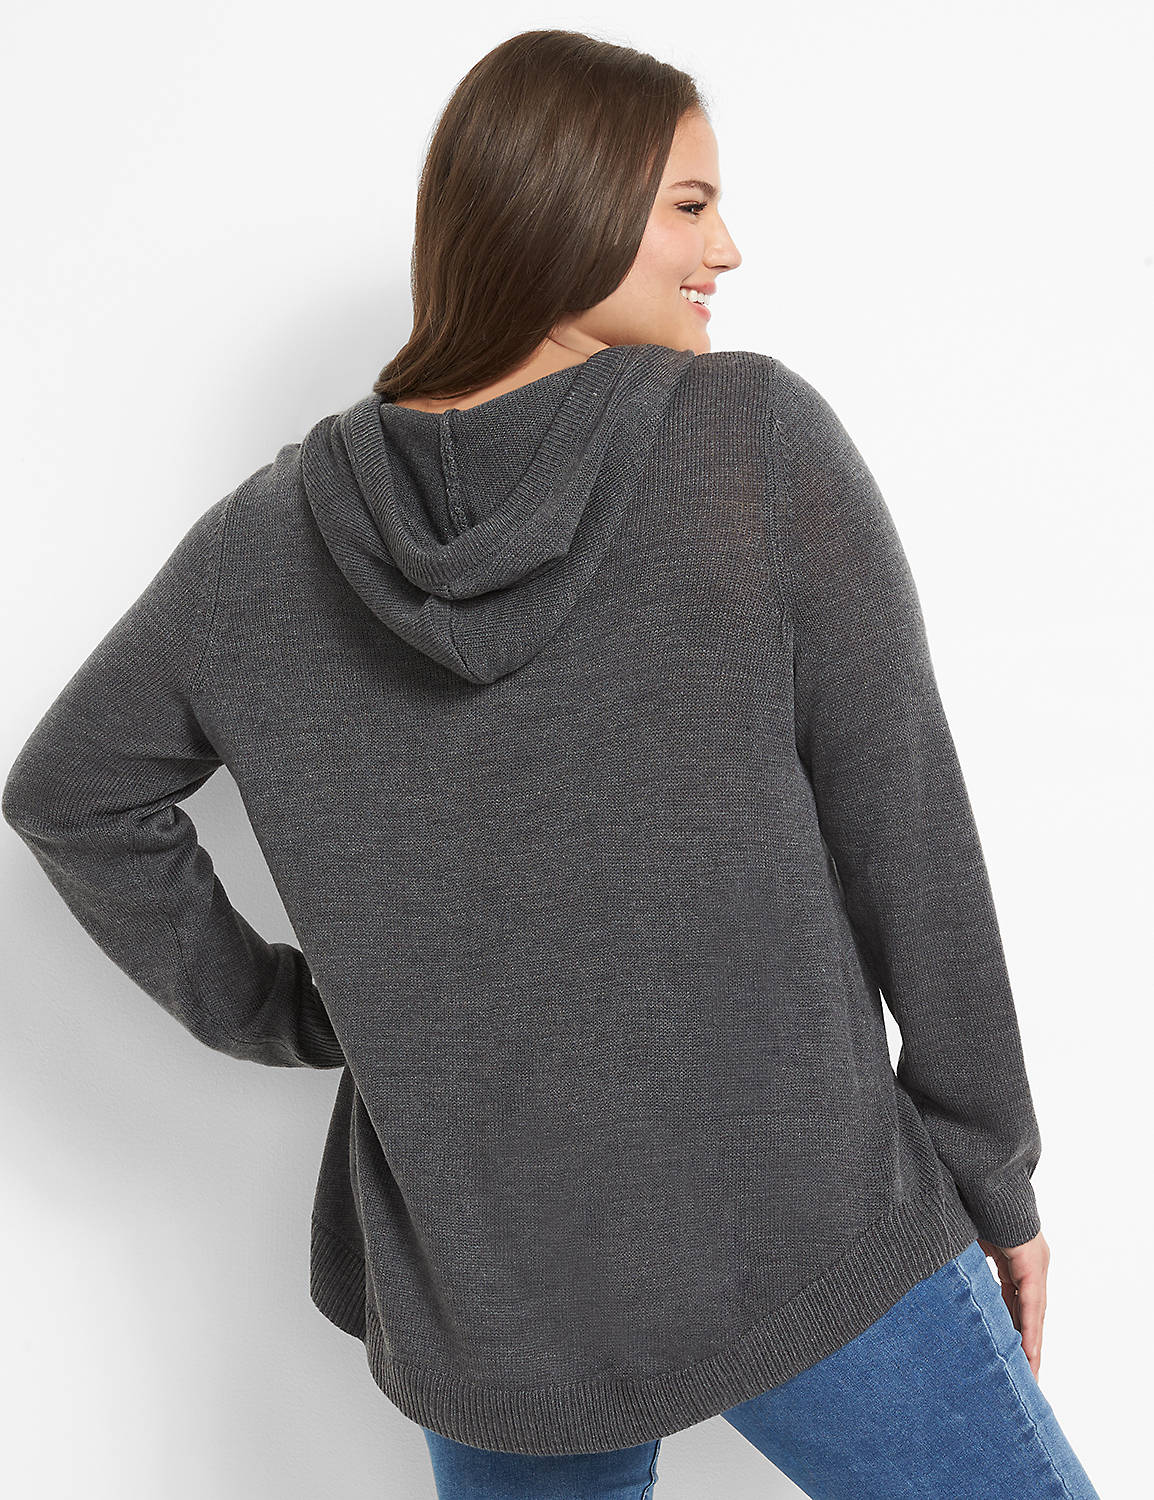 Curved-Hem Hooded Sweater Tunic Product Image 2